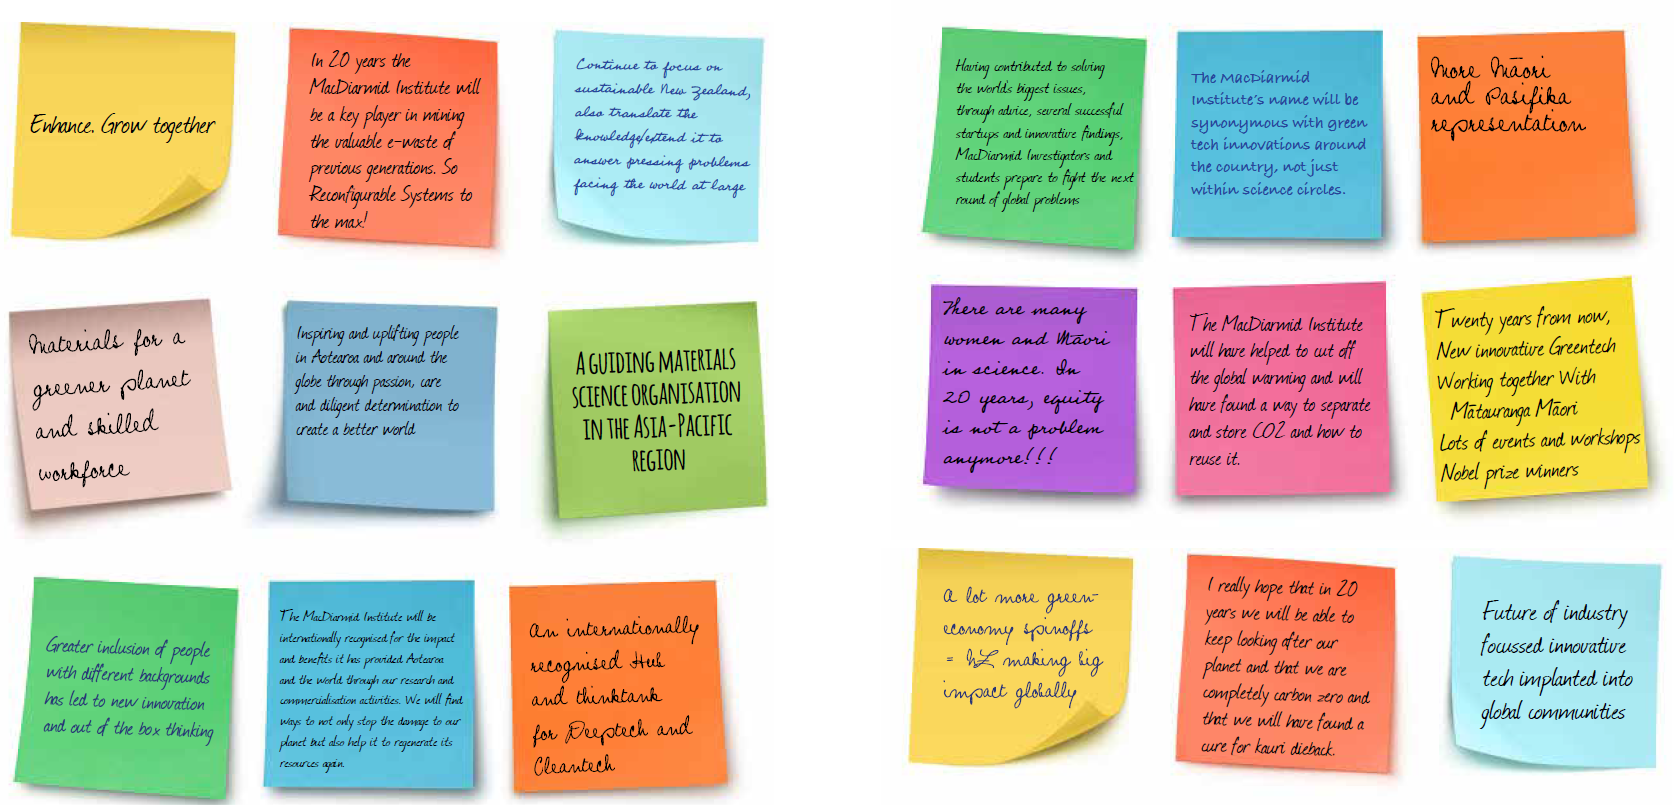 Sticky notes showing different people's comments